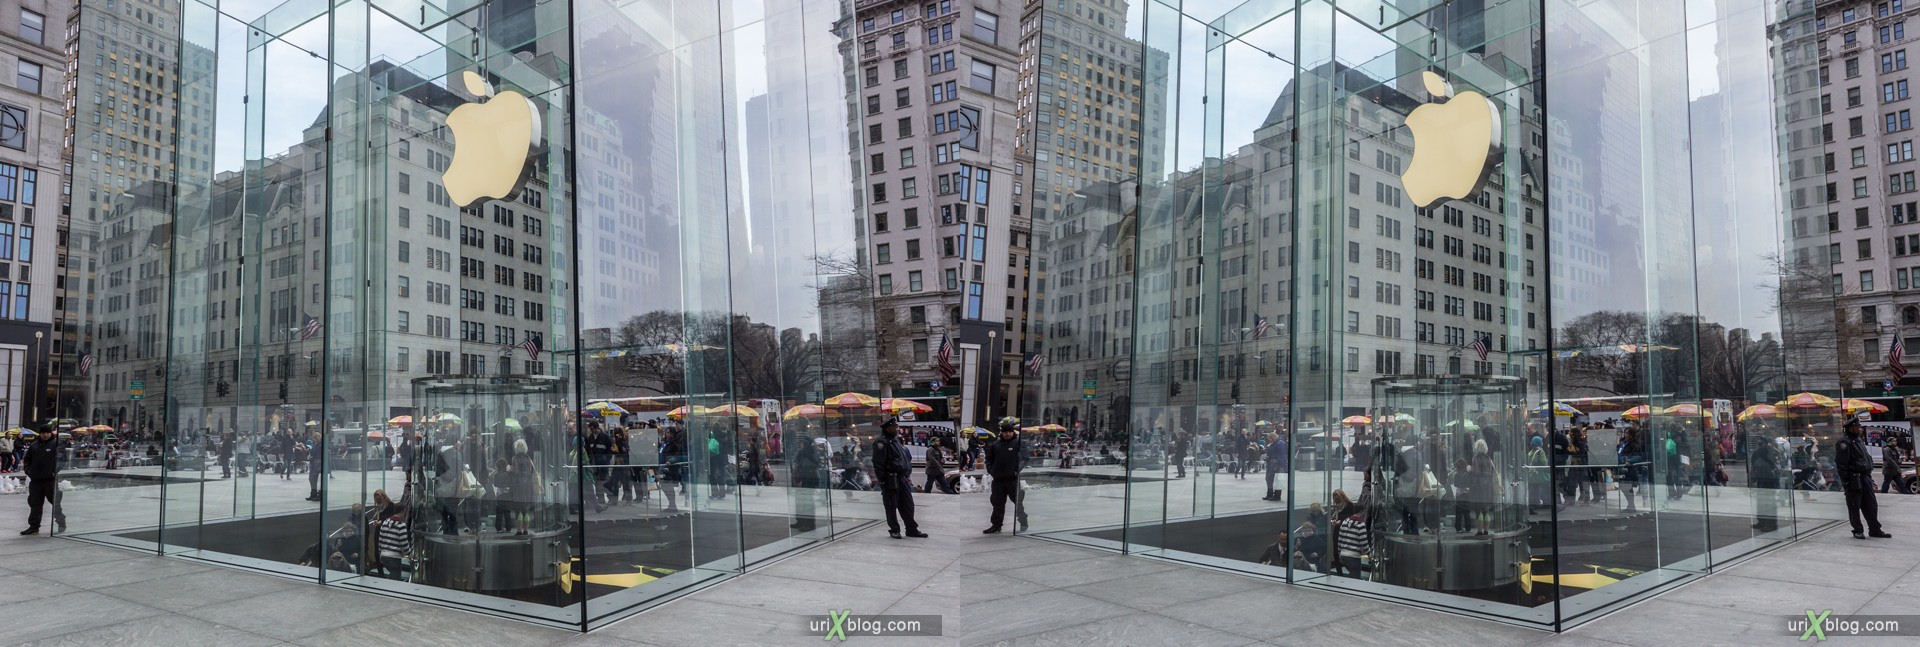 2013, Apple, Apple Store, Fifth Avenue, NYC, New York, USA, 3D, stereo pair, cross-eyed, crossview, cross view stereo pair, stereoscopic